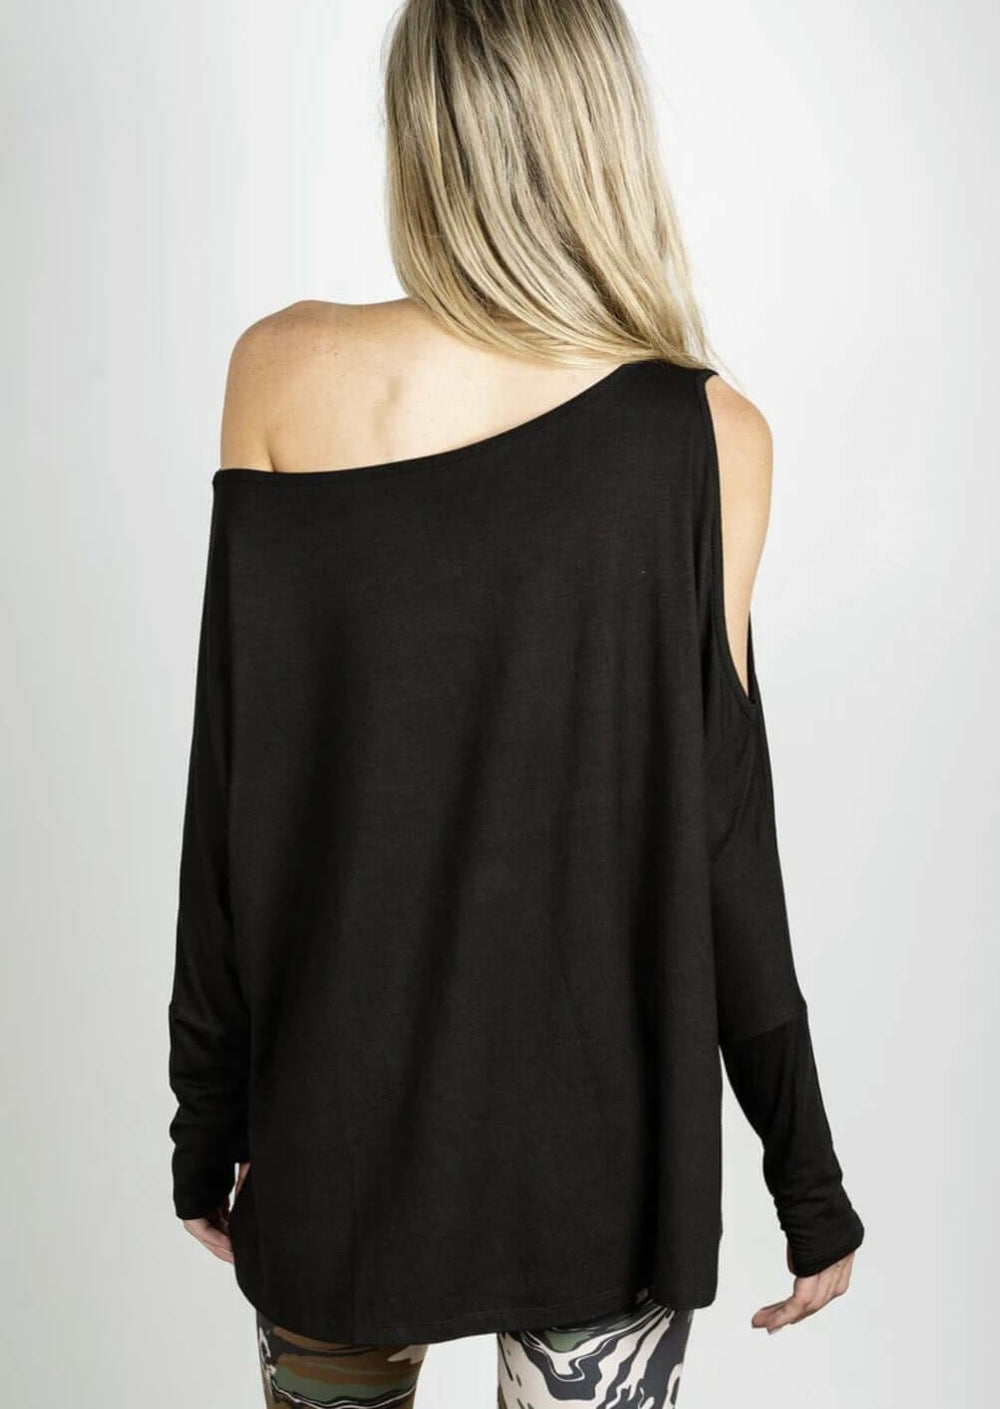 Jala Women's Duo Pullover with Cold Shoulder on one side and Off the Shoulder on the Other in Black | Style# DUO28-B | Made in USA | Classy Cozy Cool Women's Made in America Clothing Boutique